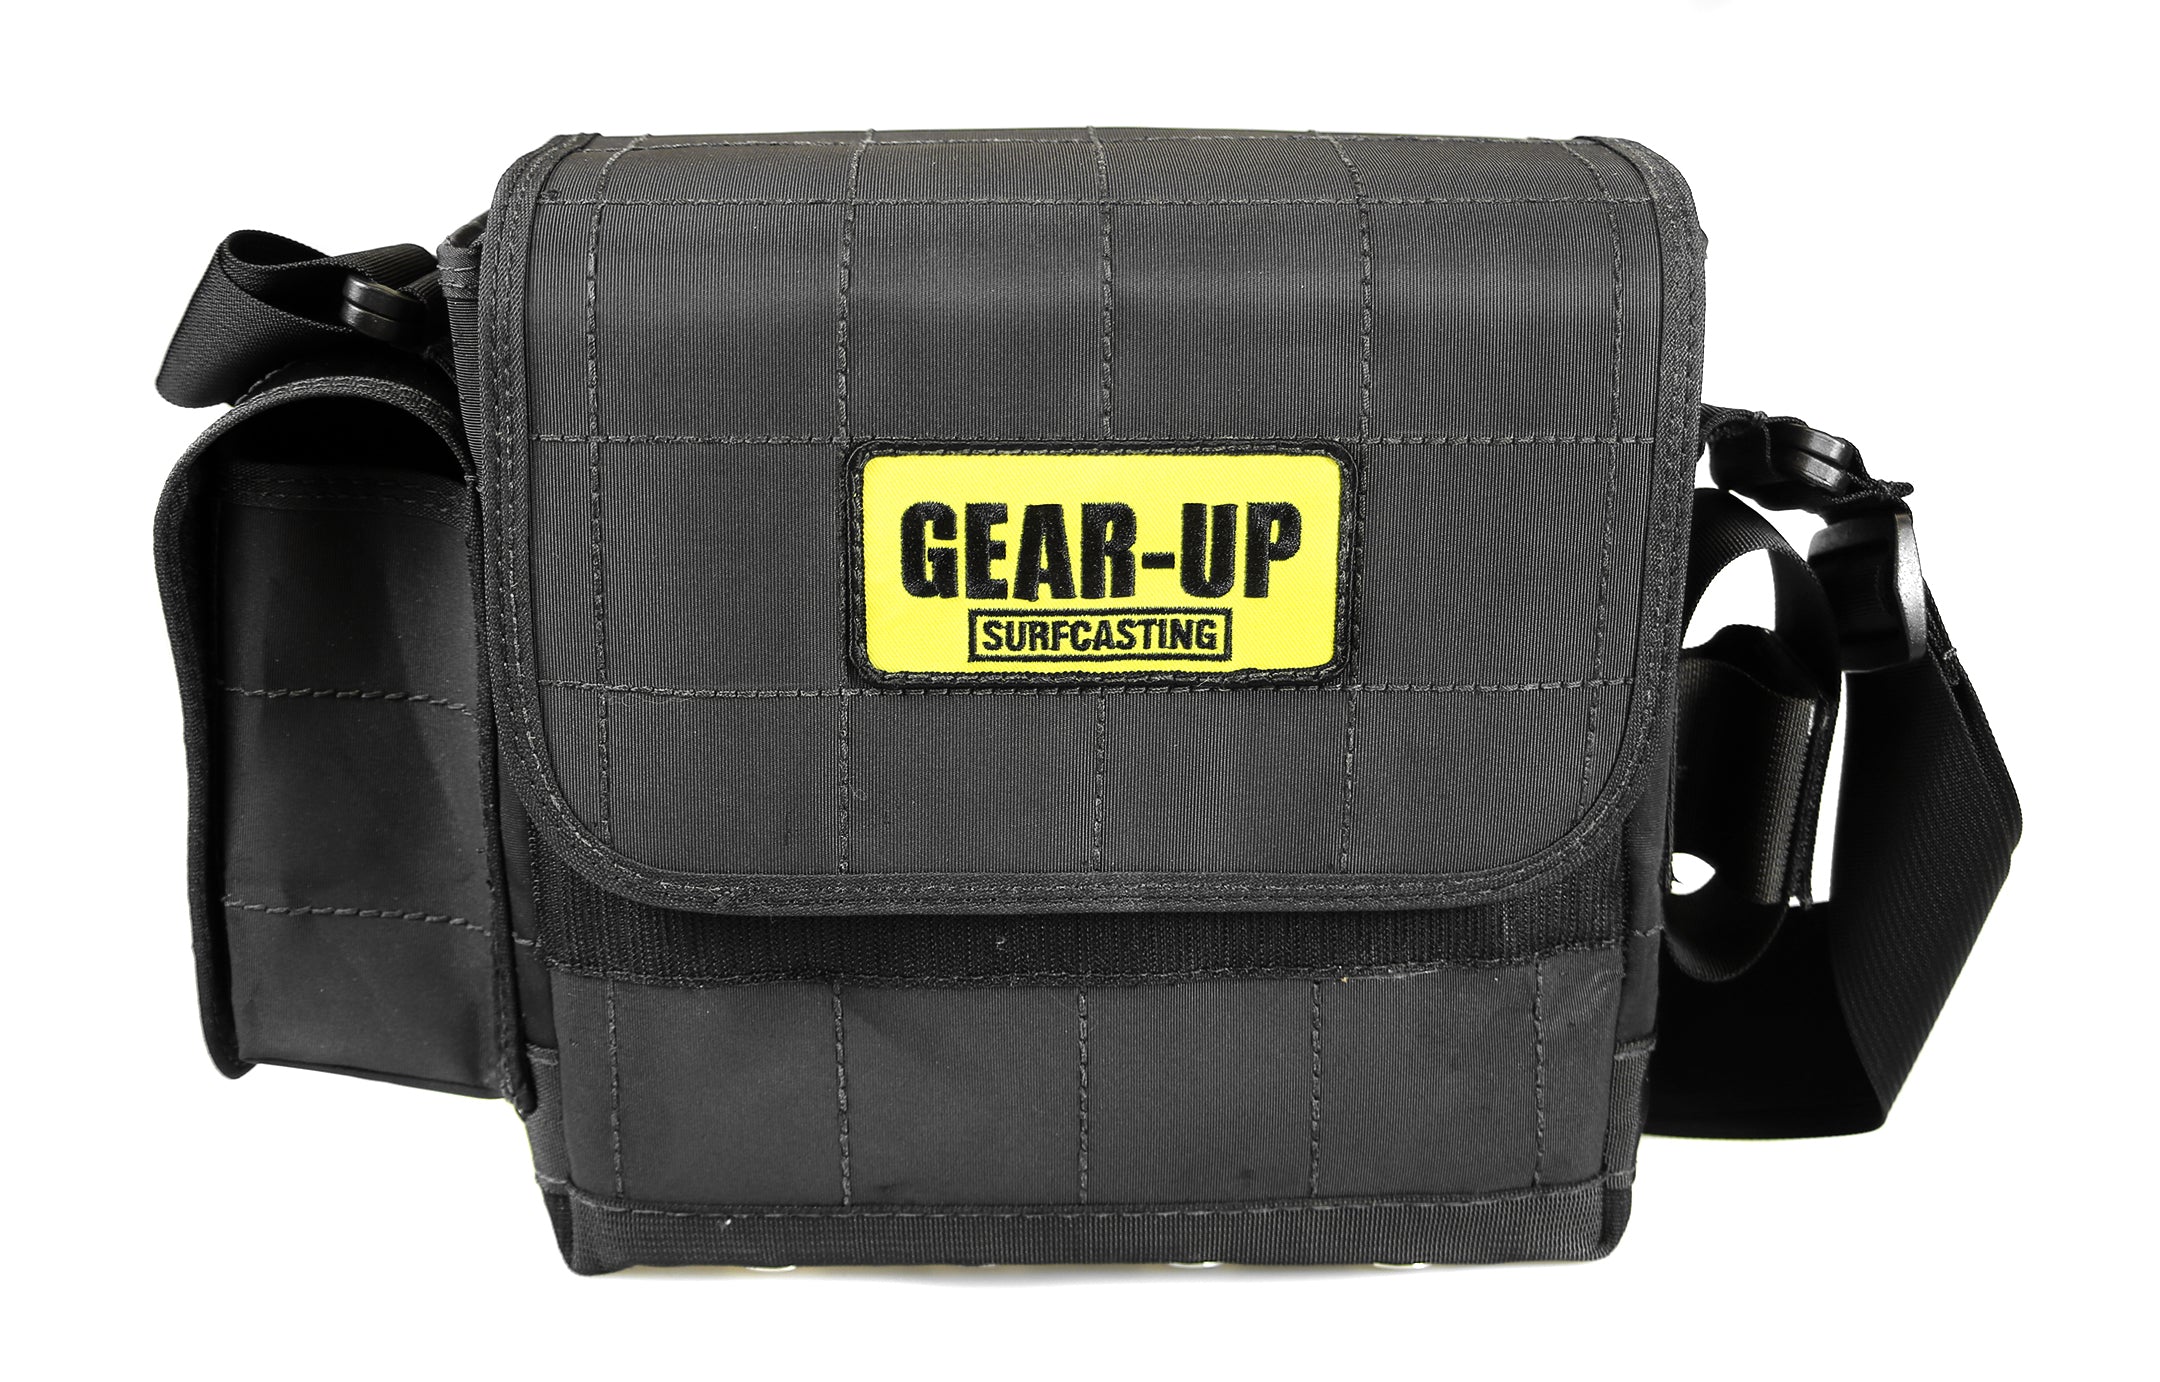 Gear-Up 3-Tube Surf Bags - Black